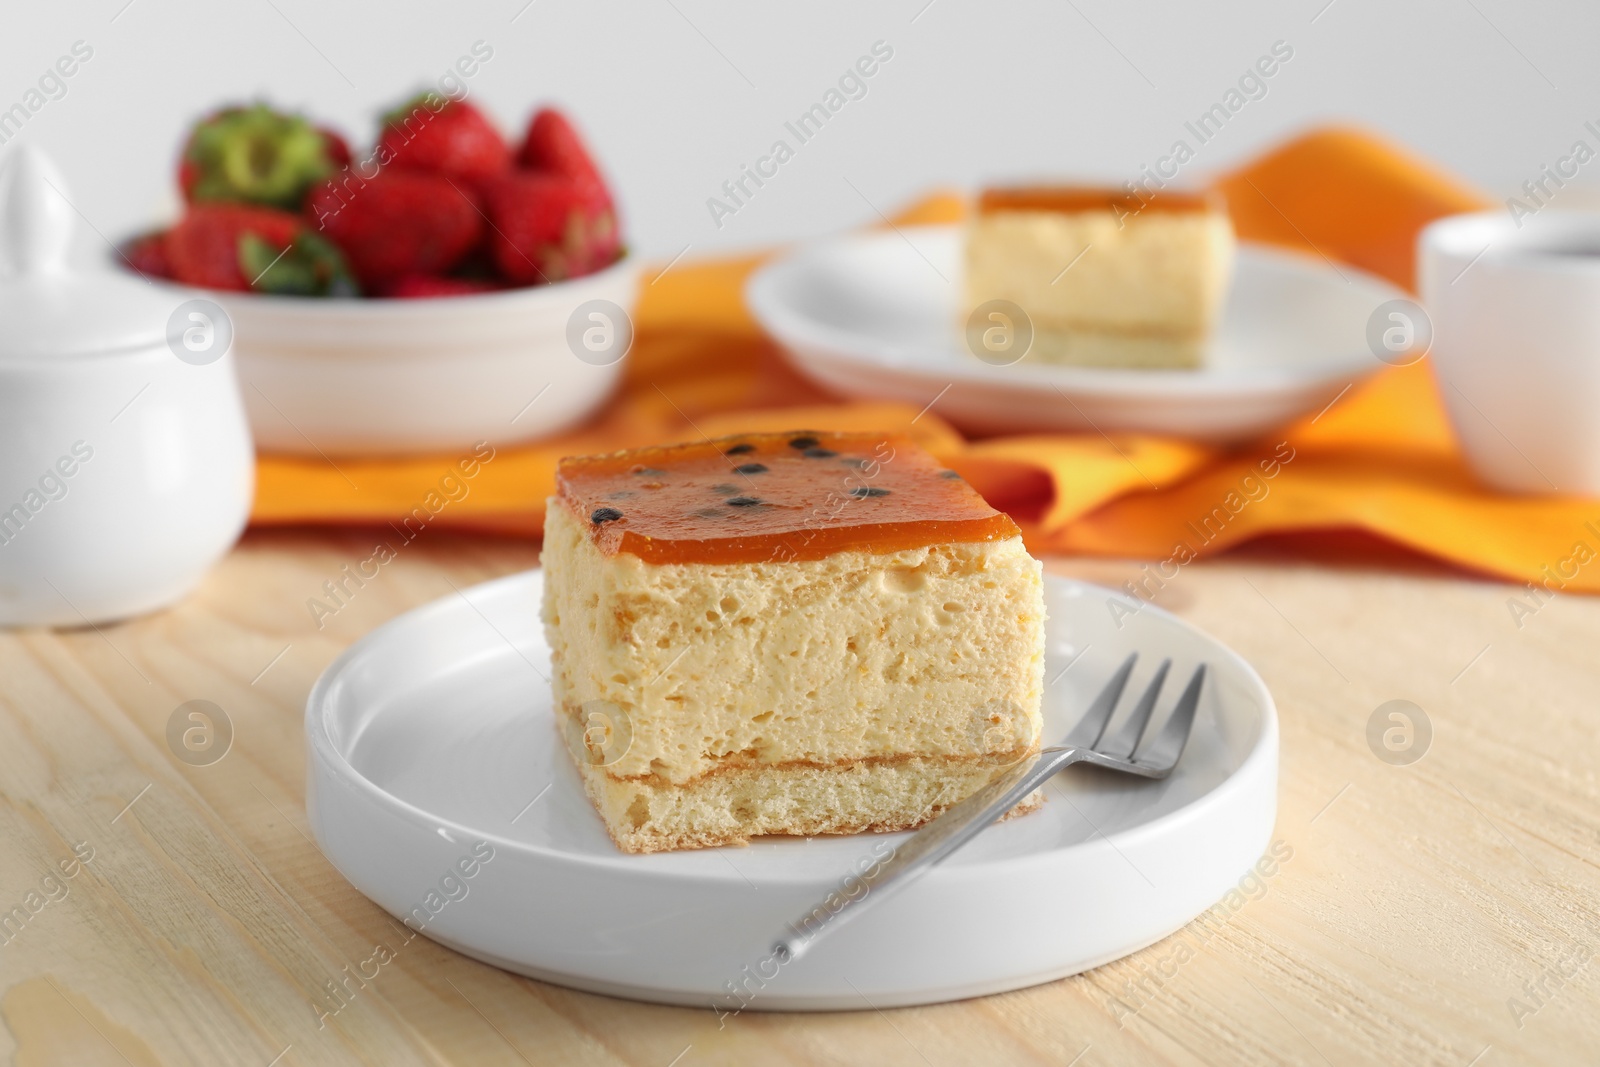 Photo of Piece of cheesecake with jelly and fork on wooden table